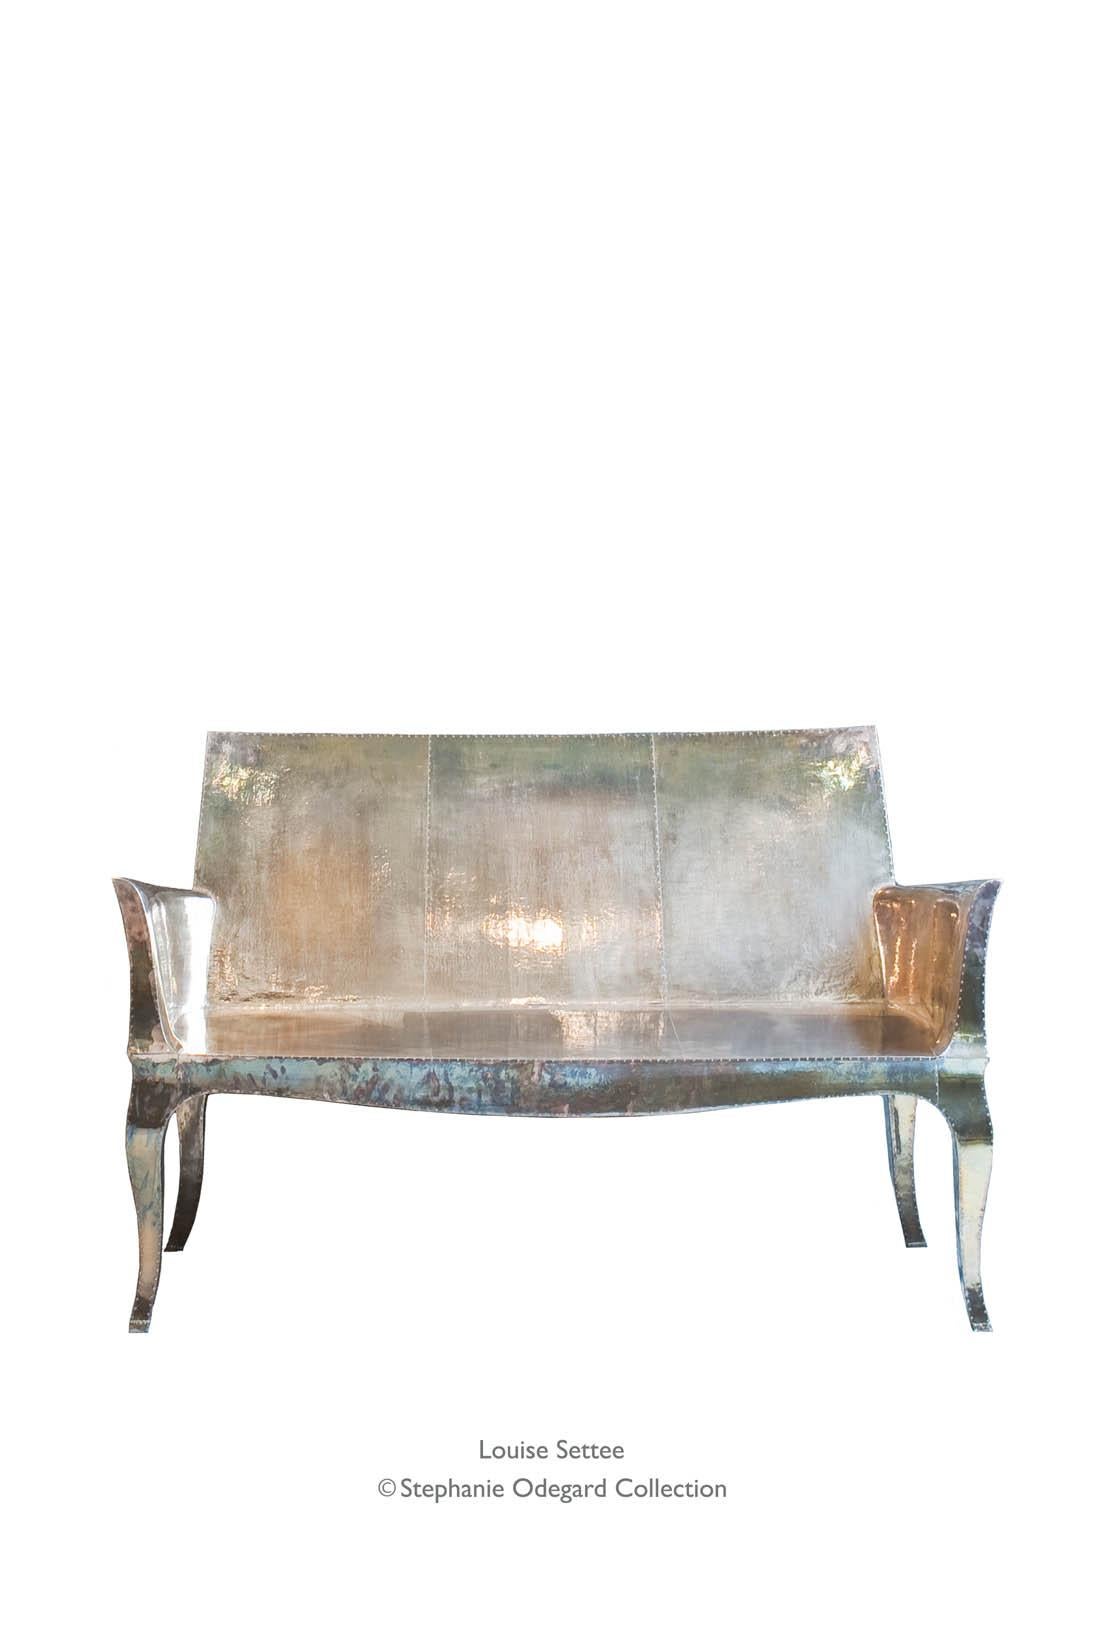 Louise Settee Art Deco Benches in Fine Hammered Copper by Paul Mathieu For Sale 6